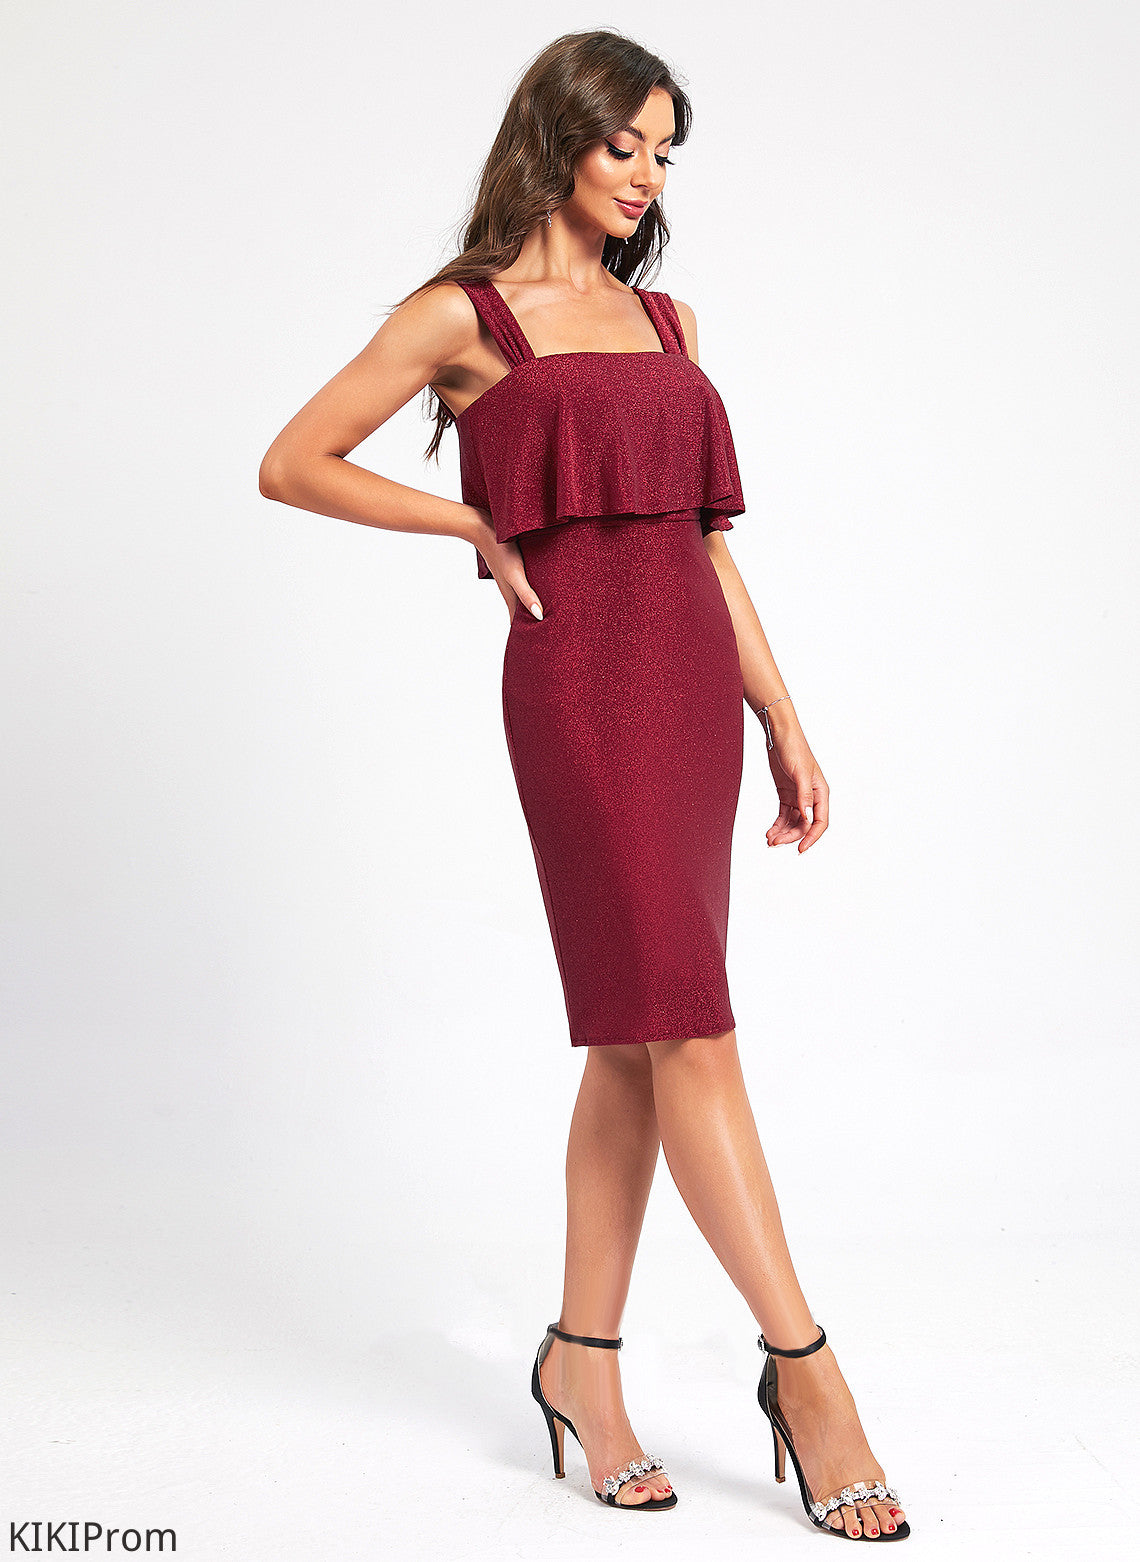 Ruffle Dress Club Dresses Cocktail Jaden With Square Polyester Bodycon Knee-Length Neckline